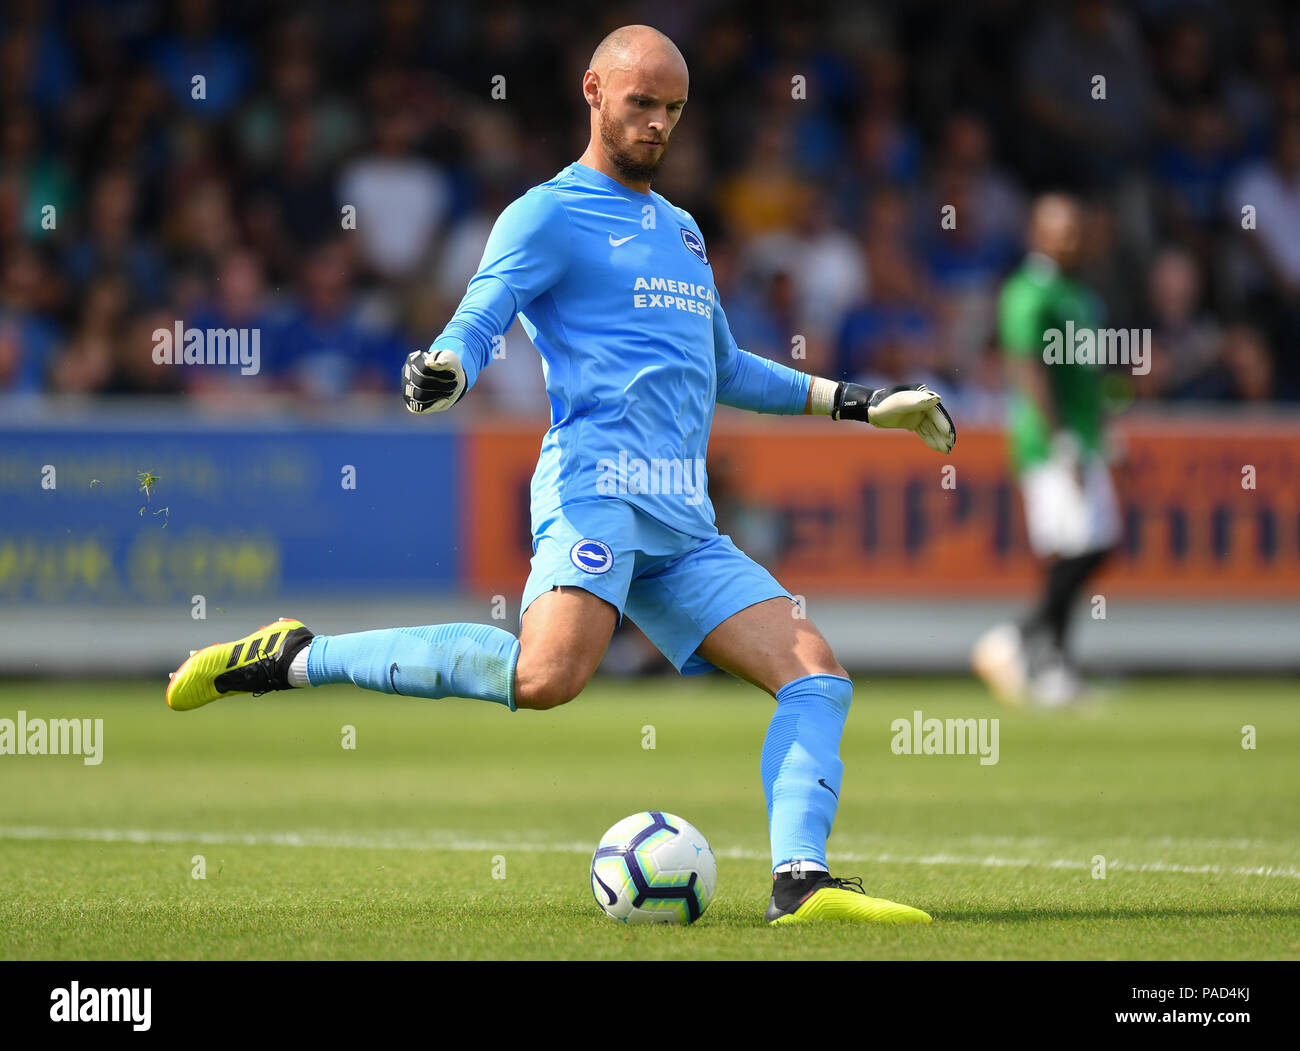 London, UK. 21st July, 2018: Brighton & Hove Albion's David Button in action during the Pre-Season Friendly against AFC Wimbledon at the Cherry Red Records Stadium, London, UK. Credit:Ashley Western/Alamy Live News Stock Photo